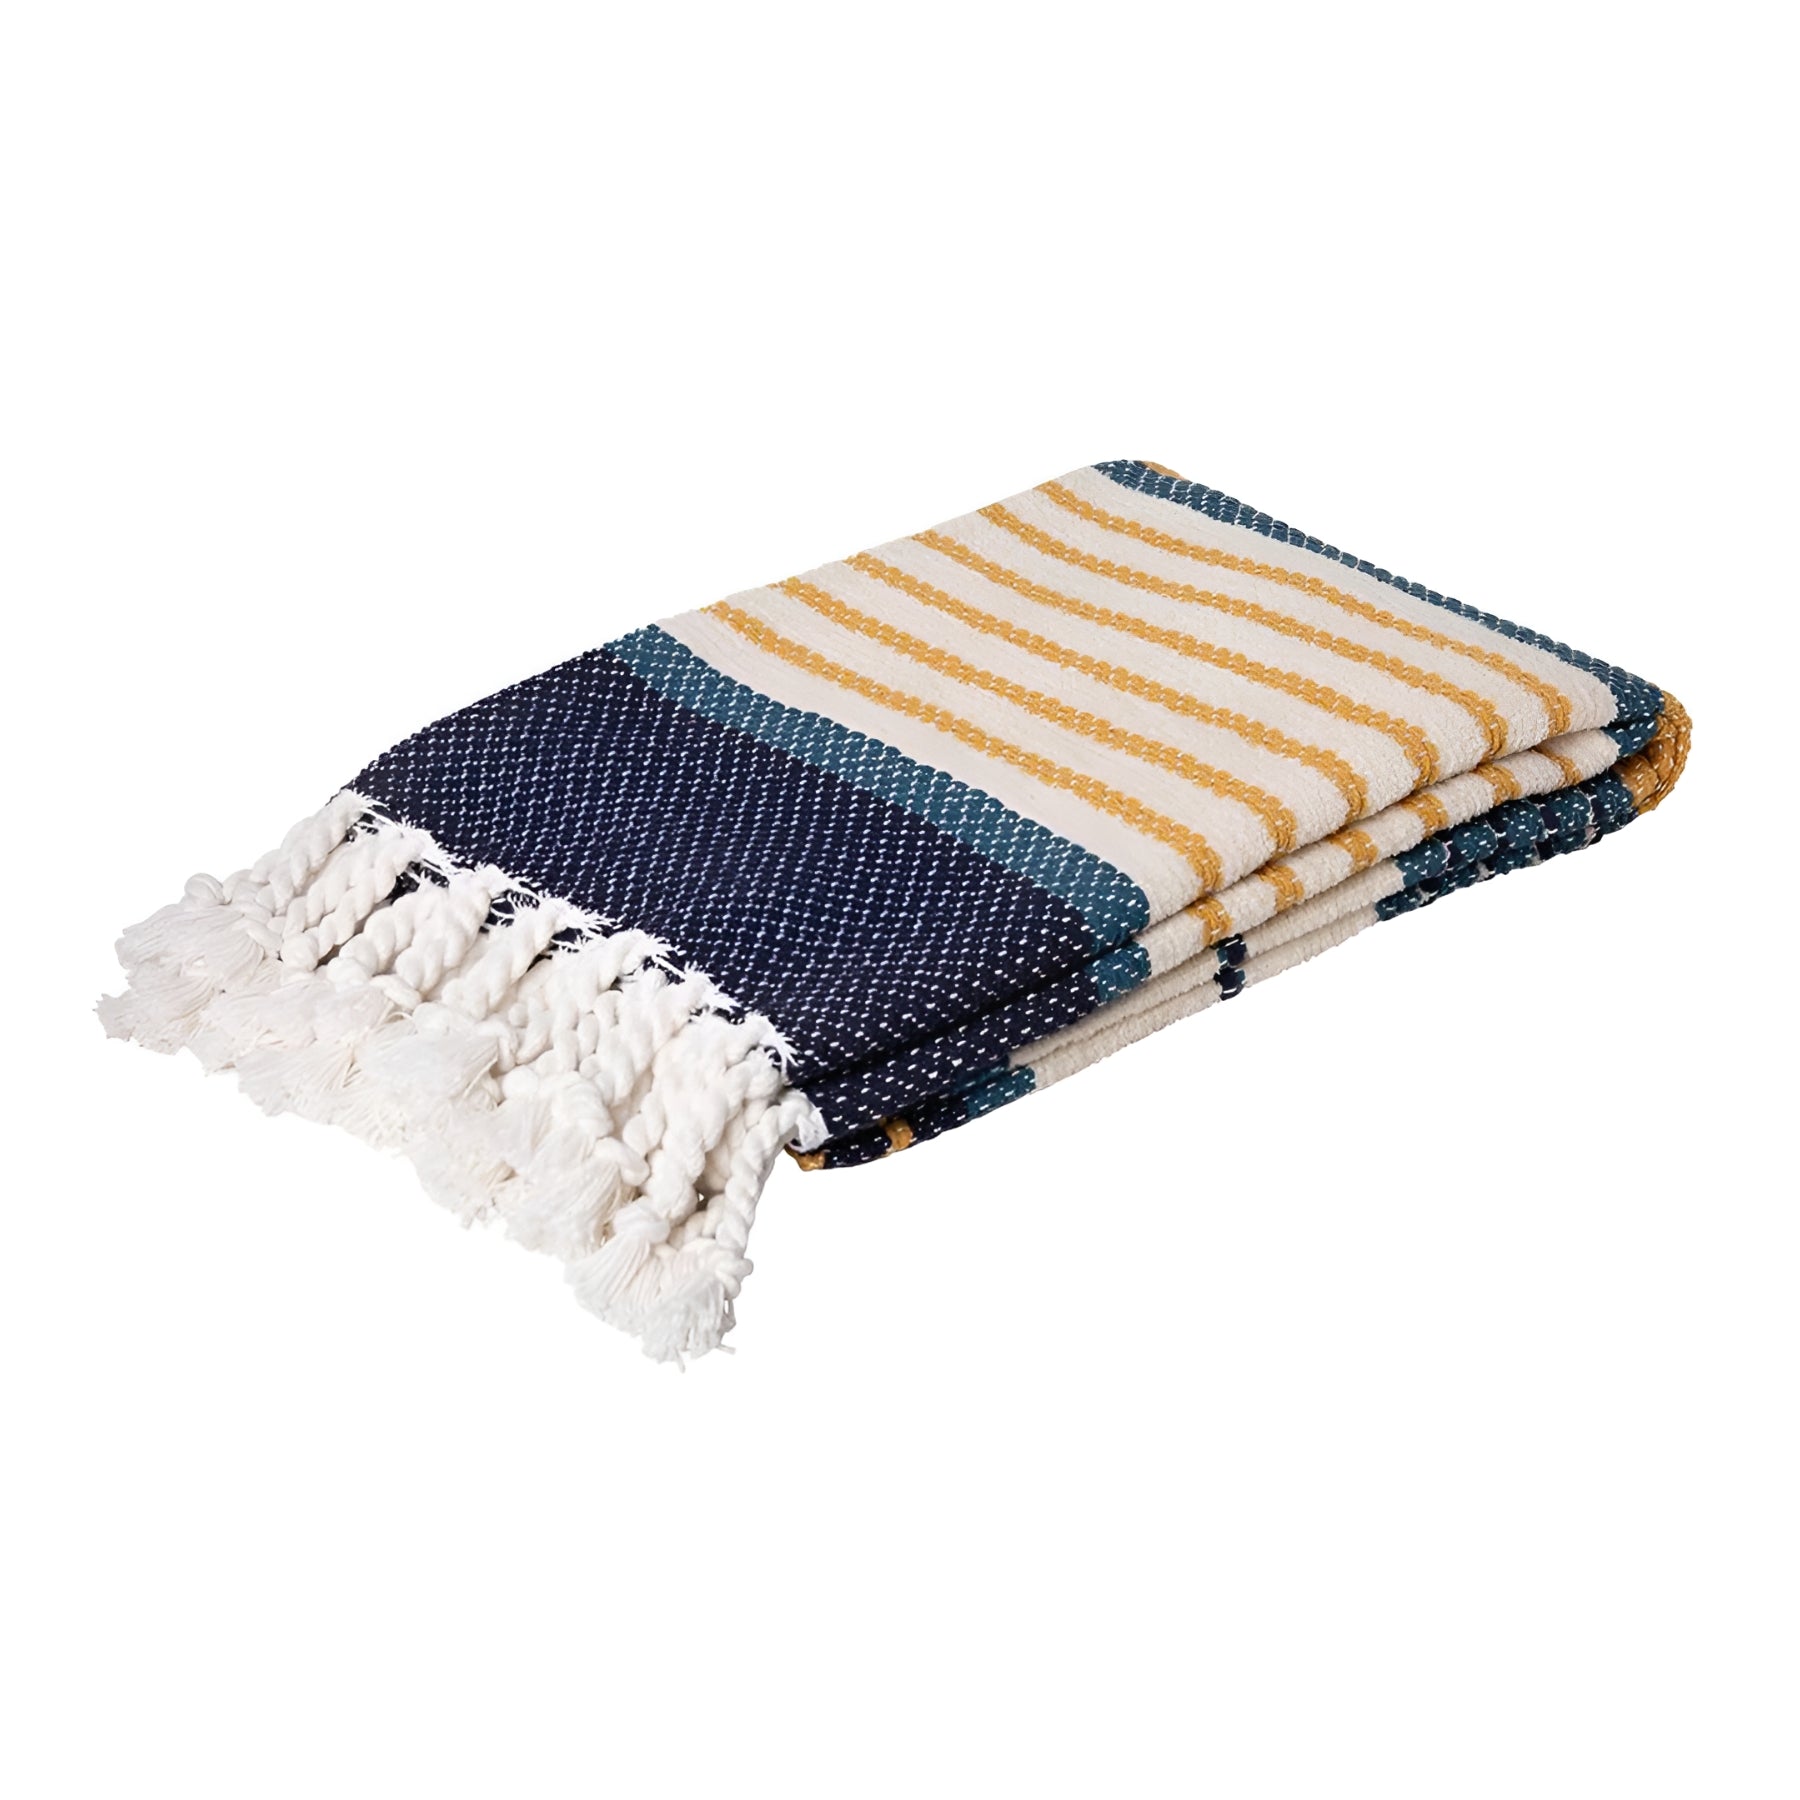 Folded Zephyr cotton throw in Blue Hues, highlighting the contrast between navy, mustard, and white stripes